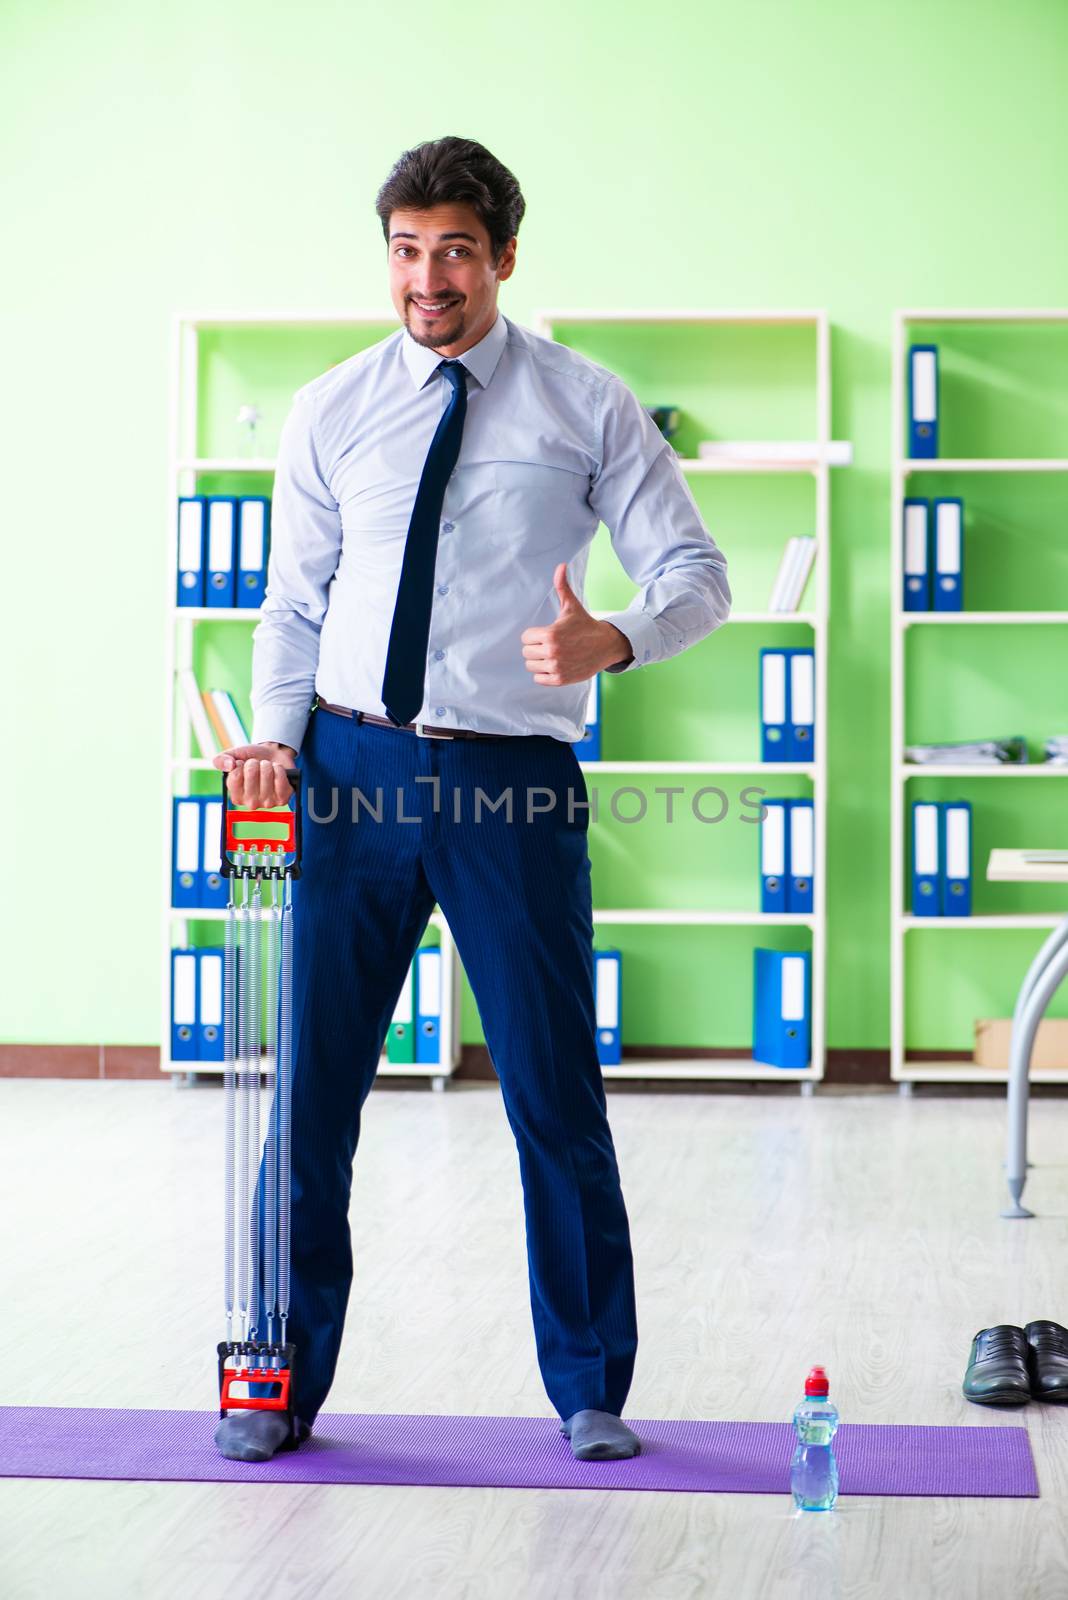 Employee doing exercises during break at work by Elnur